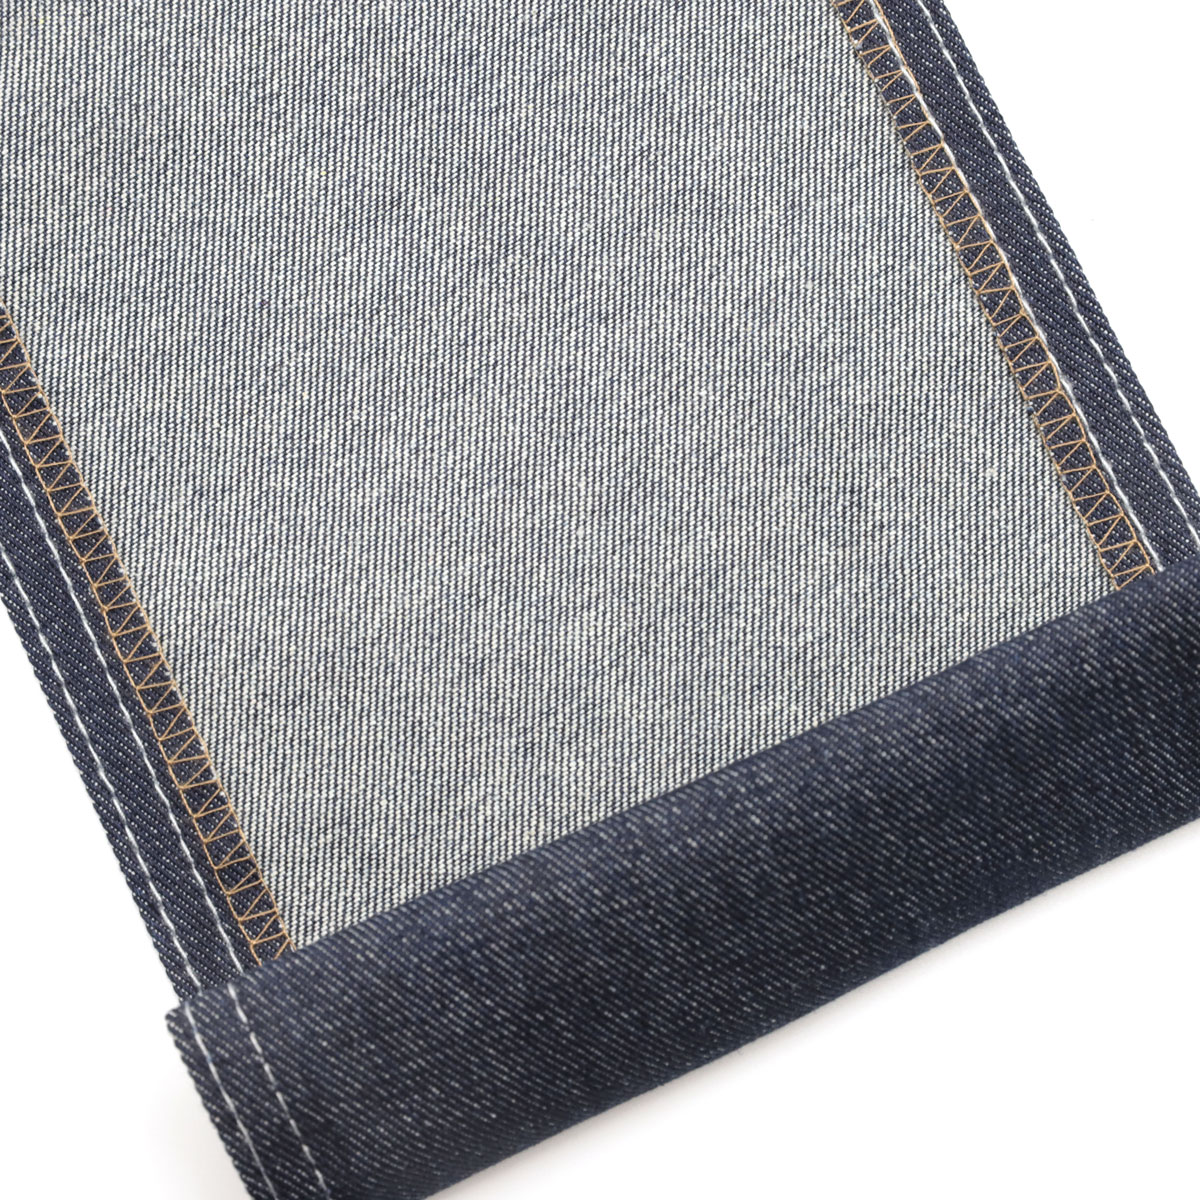 How to Use Denim Fabric Textile for Your New Home? 1